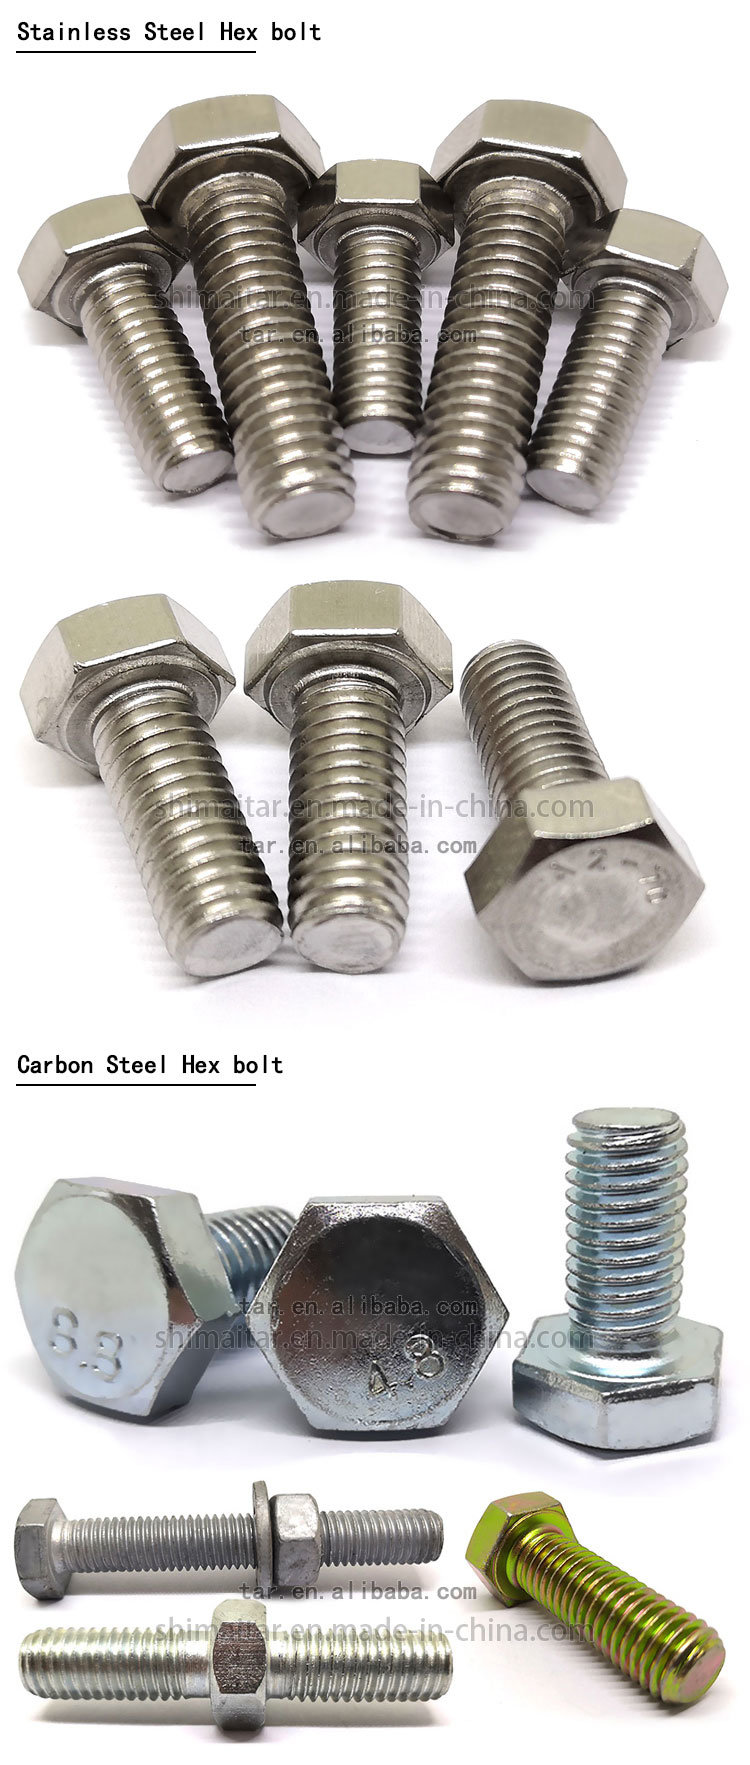 Stainless Steel Hex Bolt and Nut DIN933 Hex Bolts